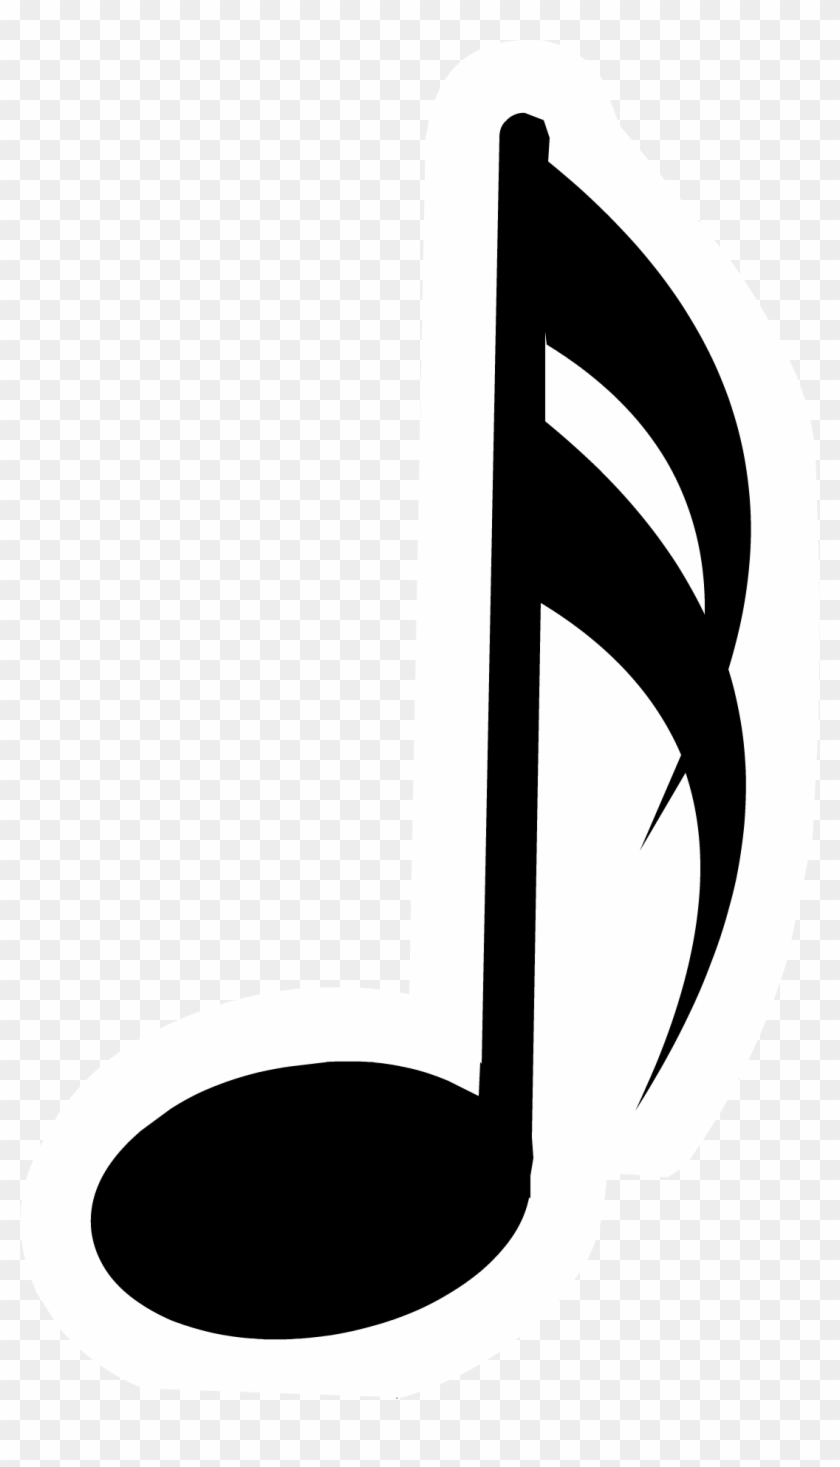 Music Notes Png - Music Note Png #243499